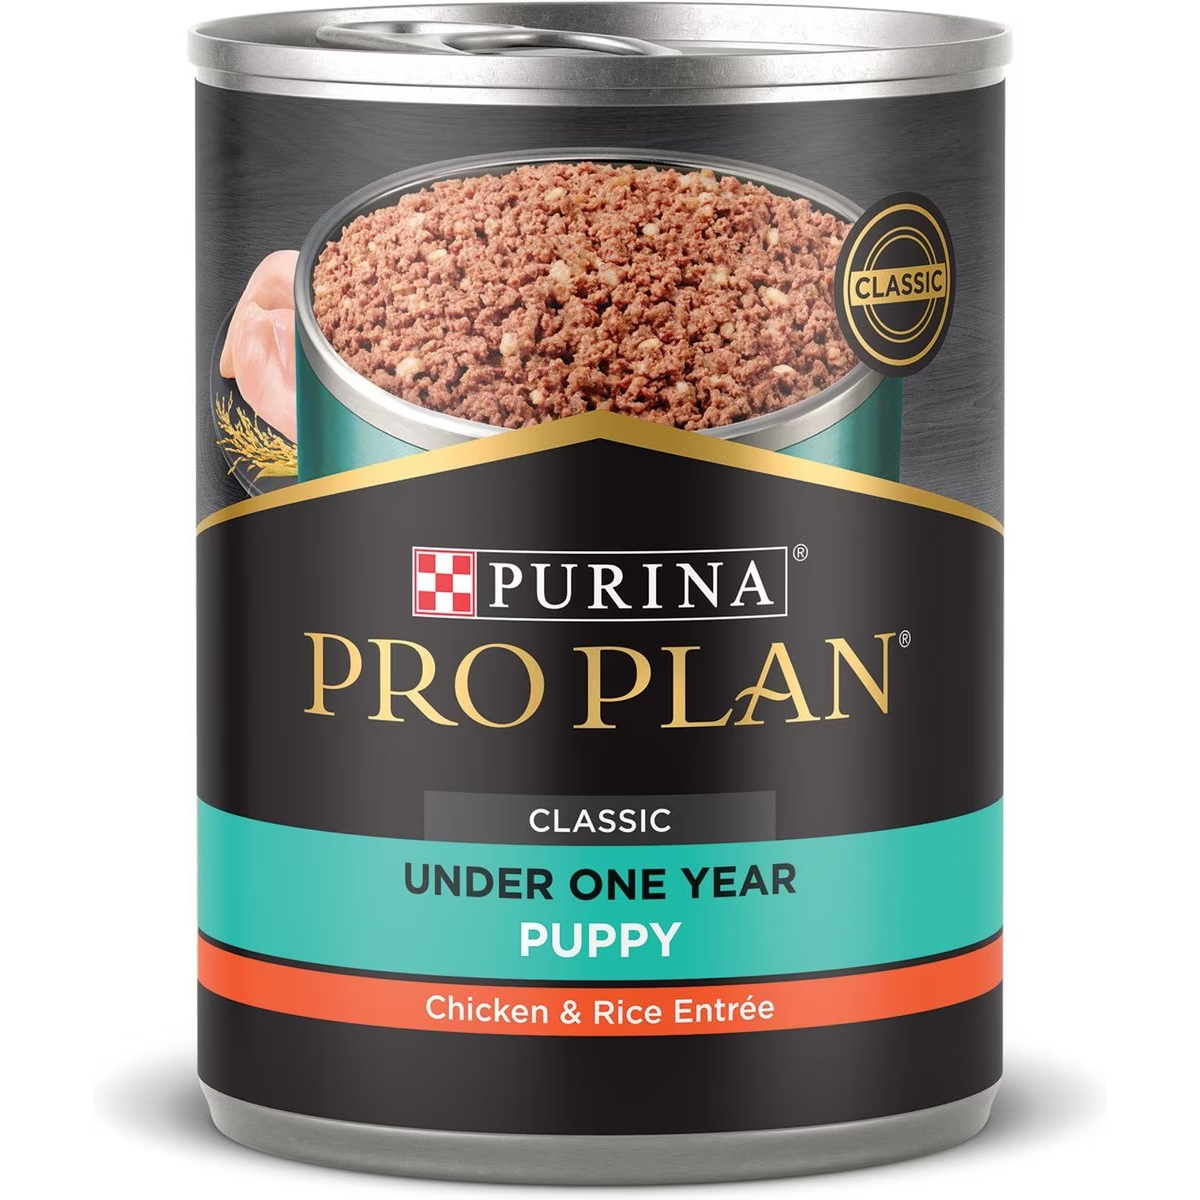 Purina Pro Plan Development Puppy Chicken & Rice Entree Canned Dog Food 